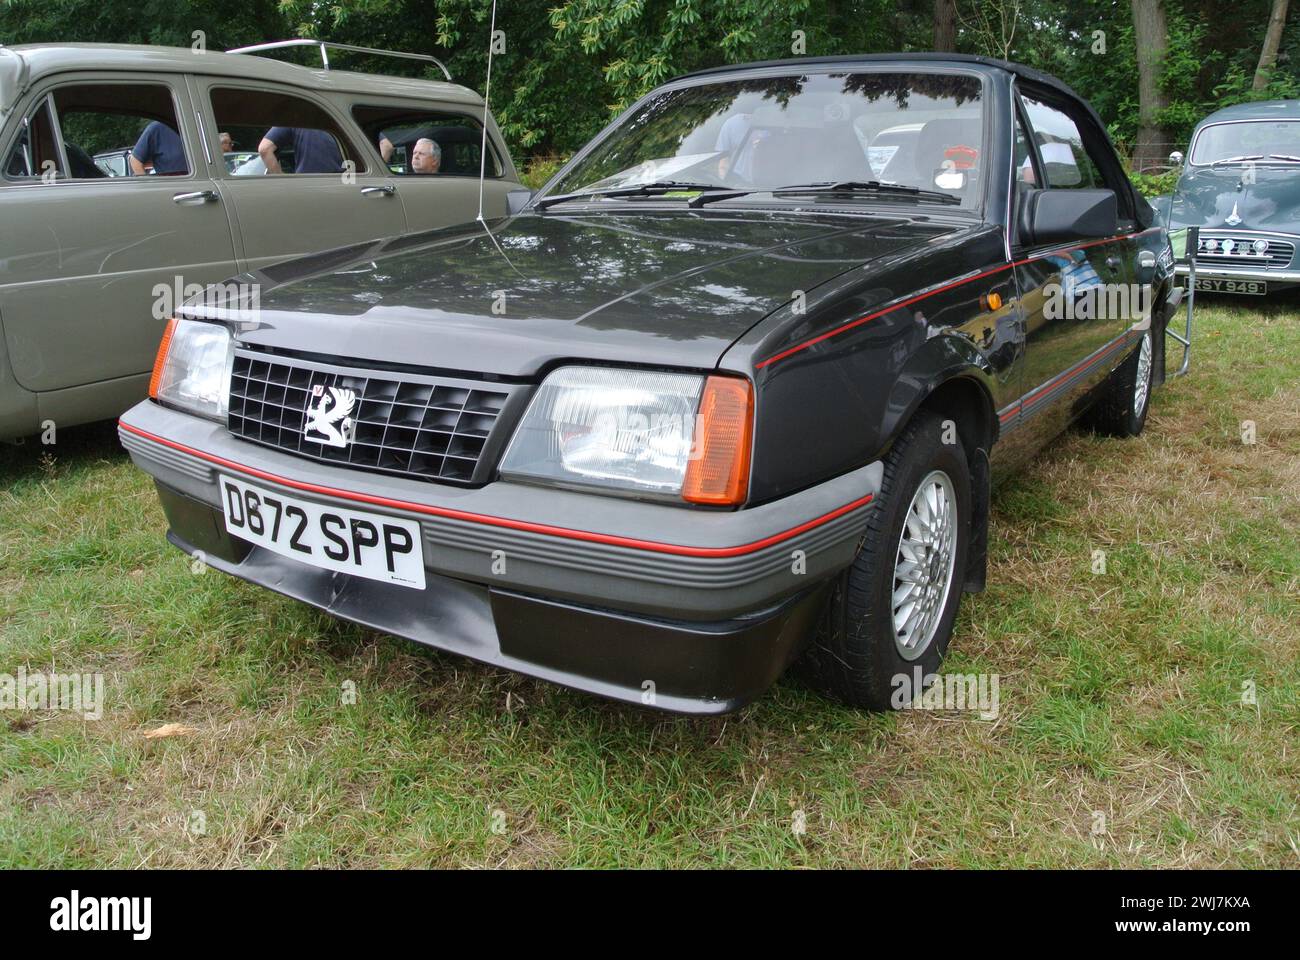 A 1987 Vauxhall Cavalier convertible Mk 2 parked on display at the 48th Historic Vehicle Gathering, Powderham, Devon, England, UK. Stock Photo